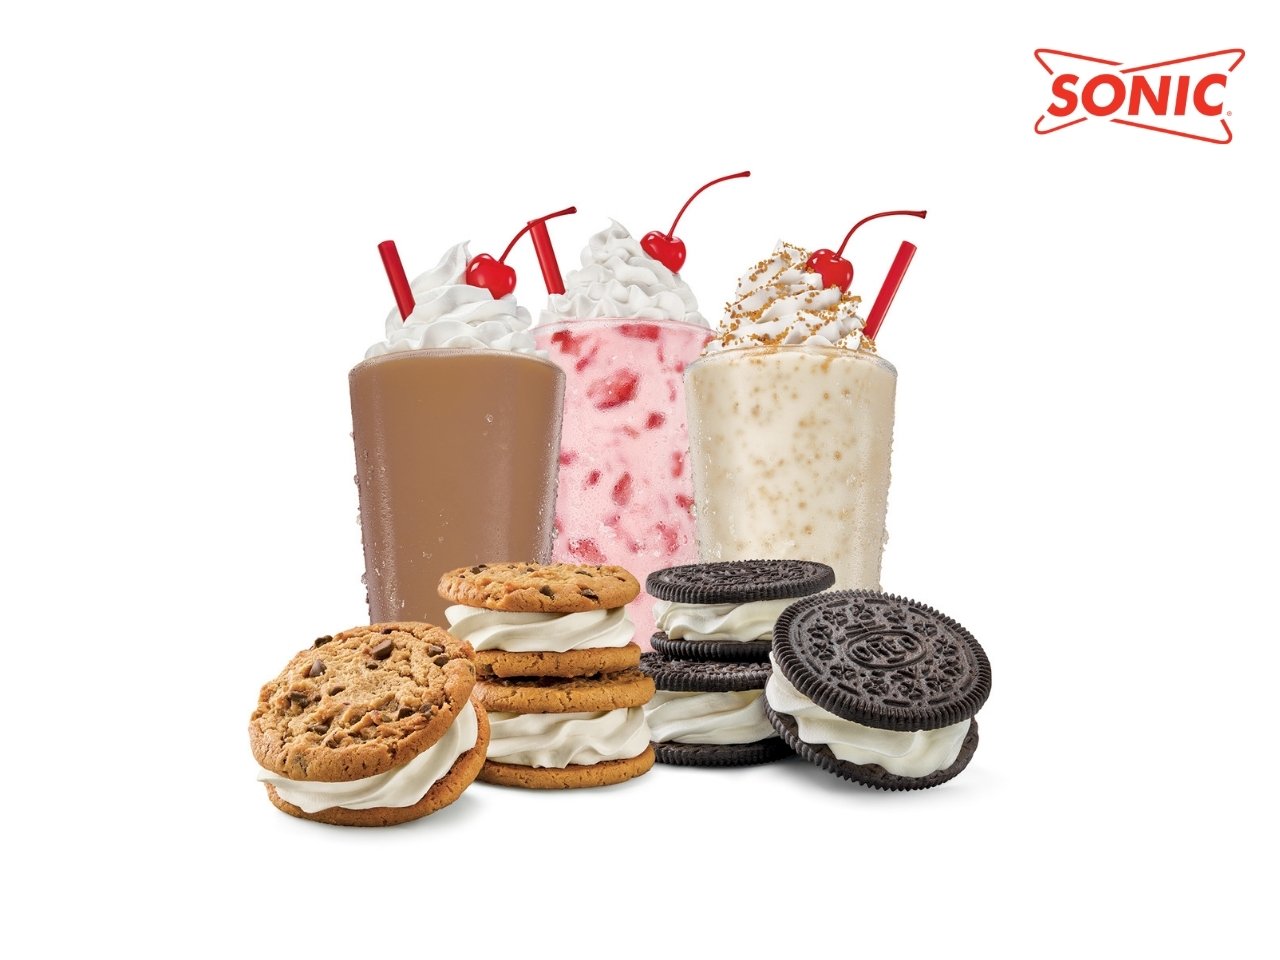 Sonic Nights Sm Is Back With All New Ice Cream Cookie Sandwiches And Half Price Shakes After 8 P M